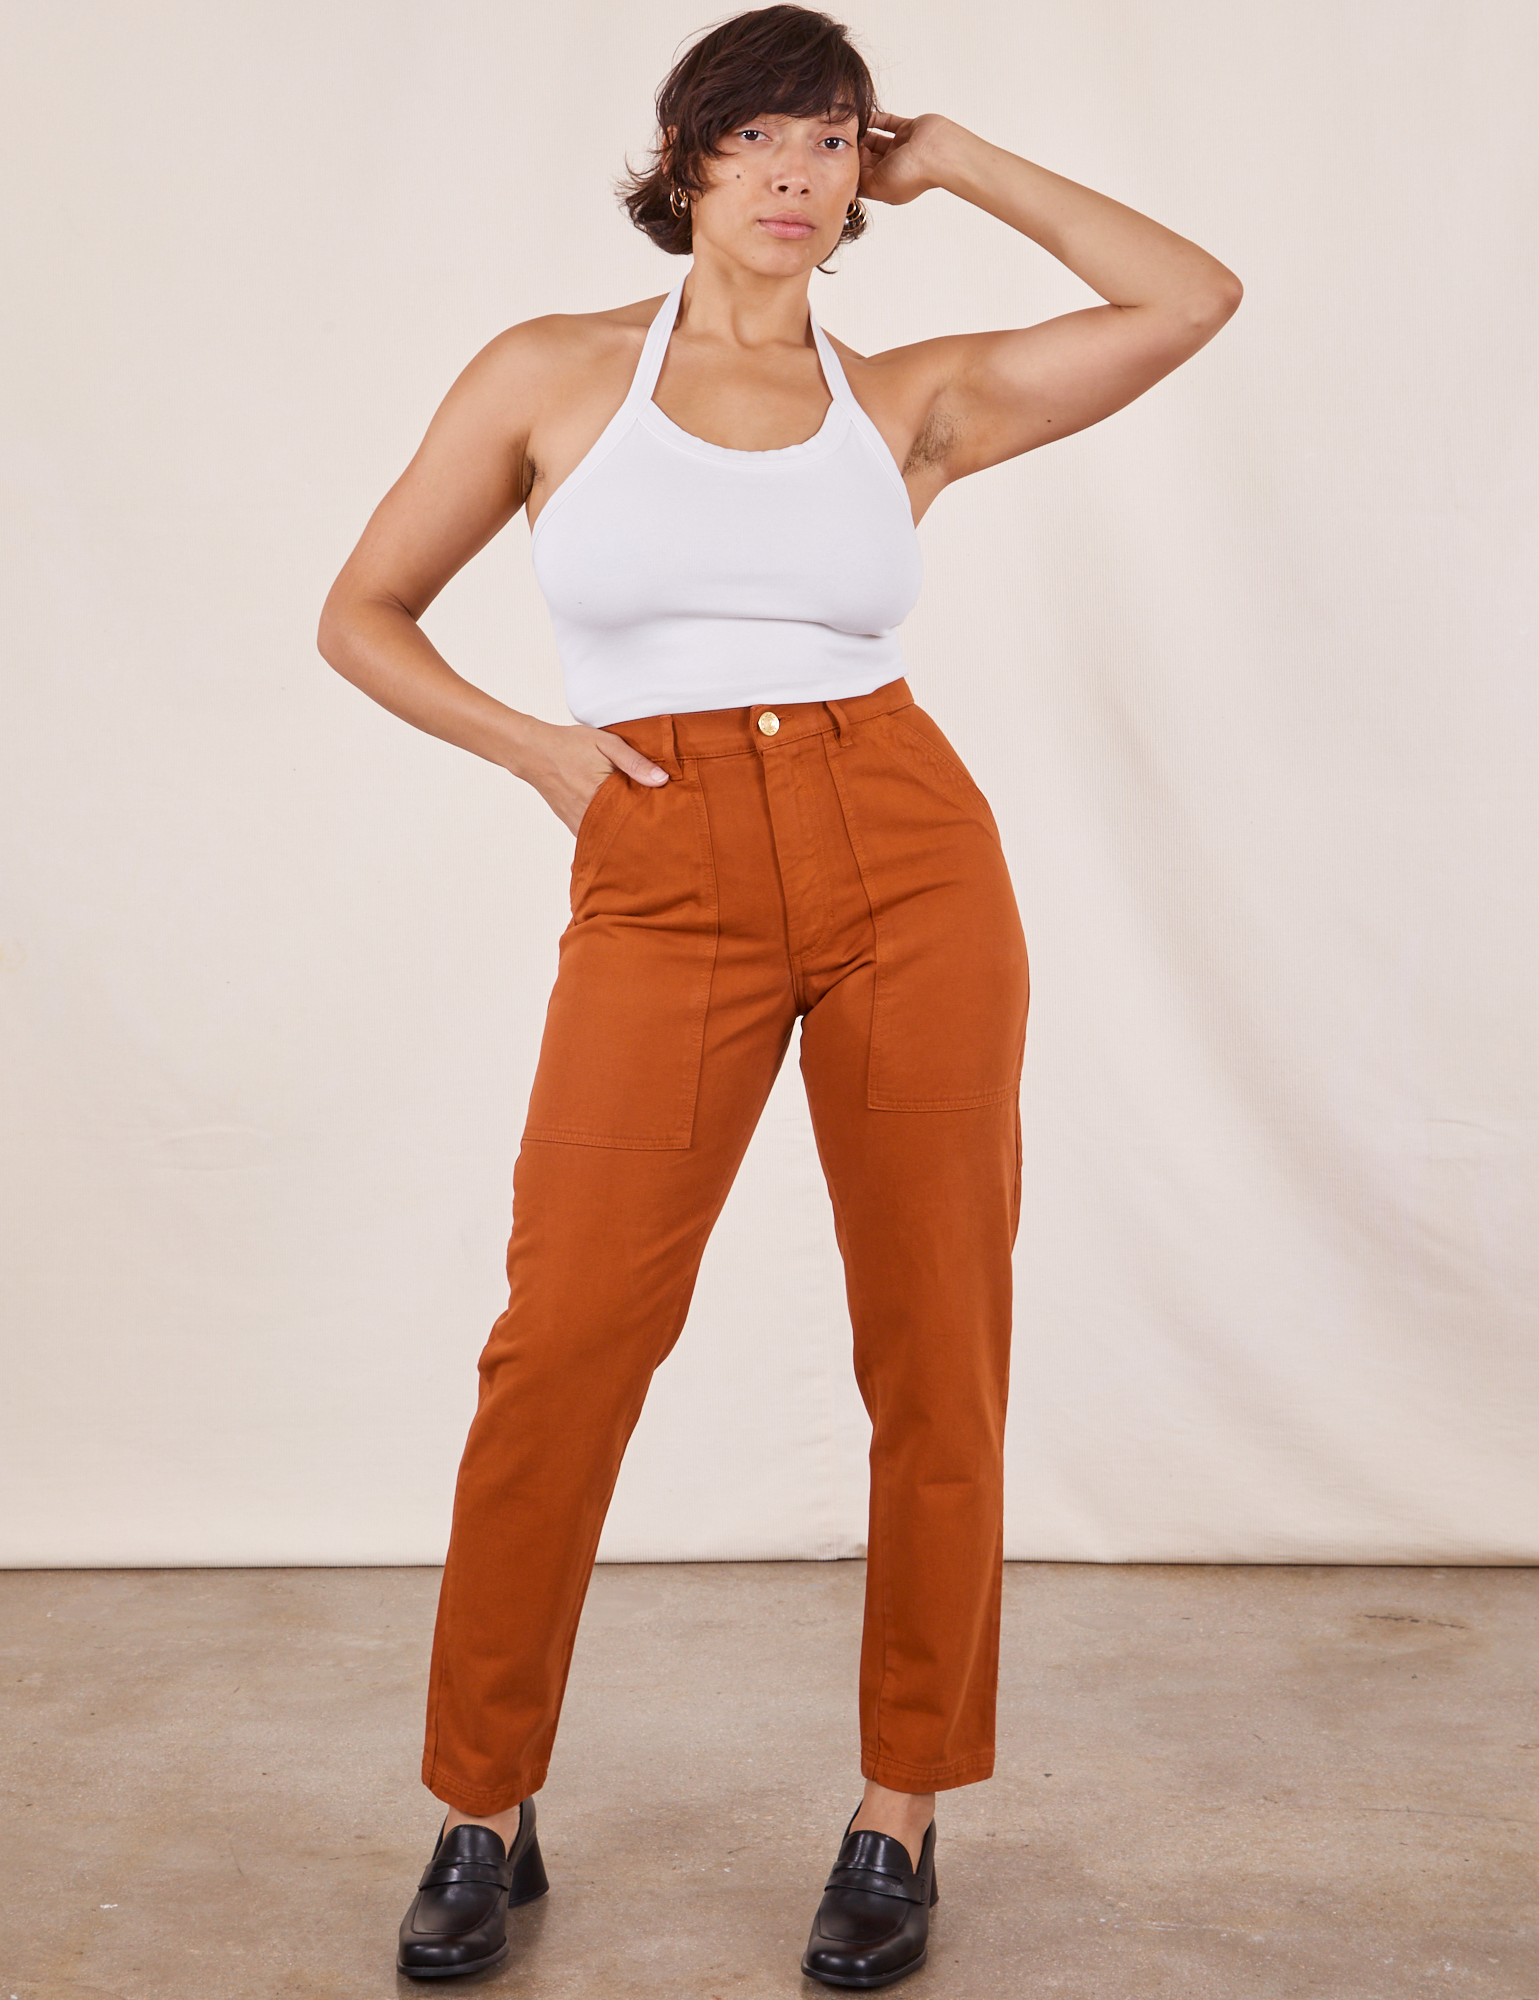 Tiara is 5&#39;4&quot; and wearing XS Pencil Pants in Burnt Terracotta paired with Halter Top in vintage tee off-white